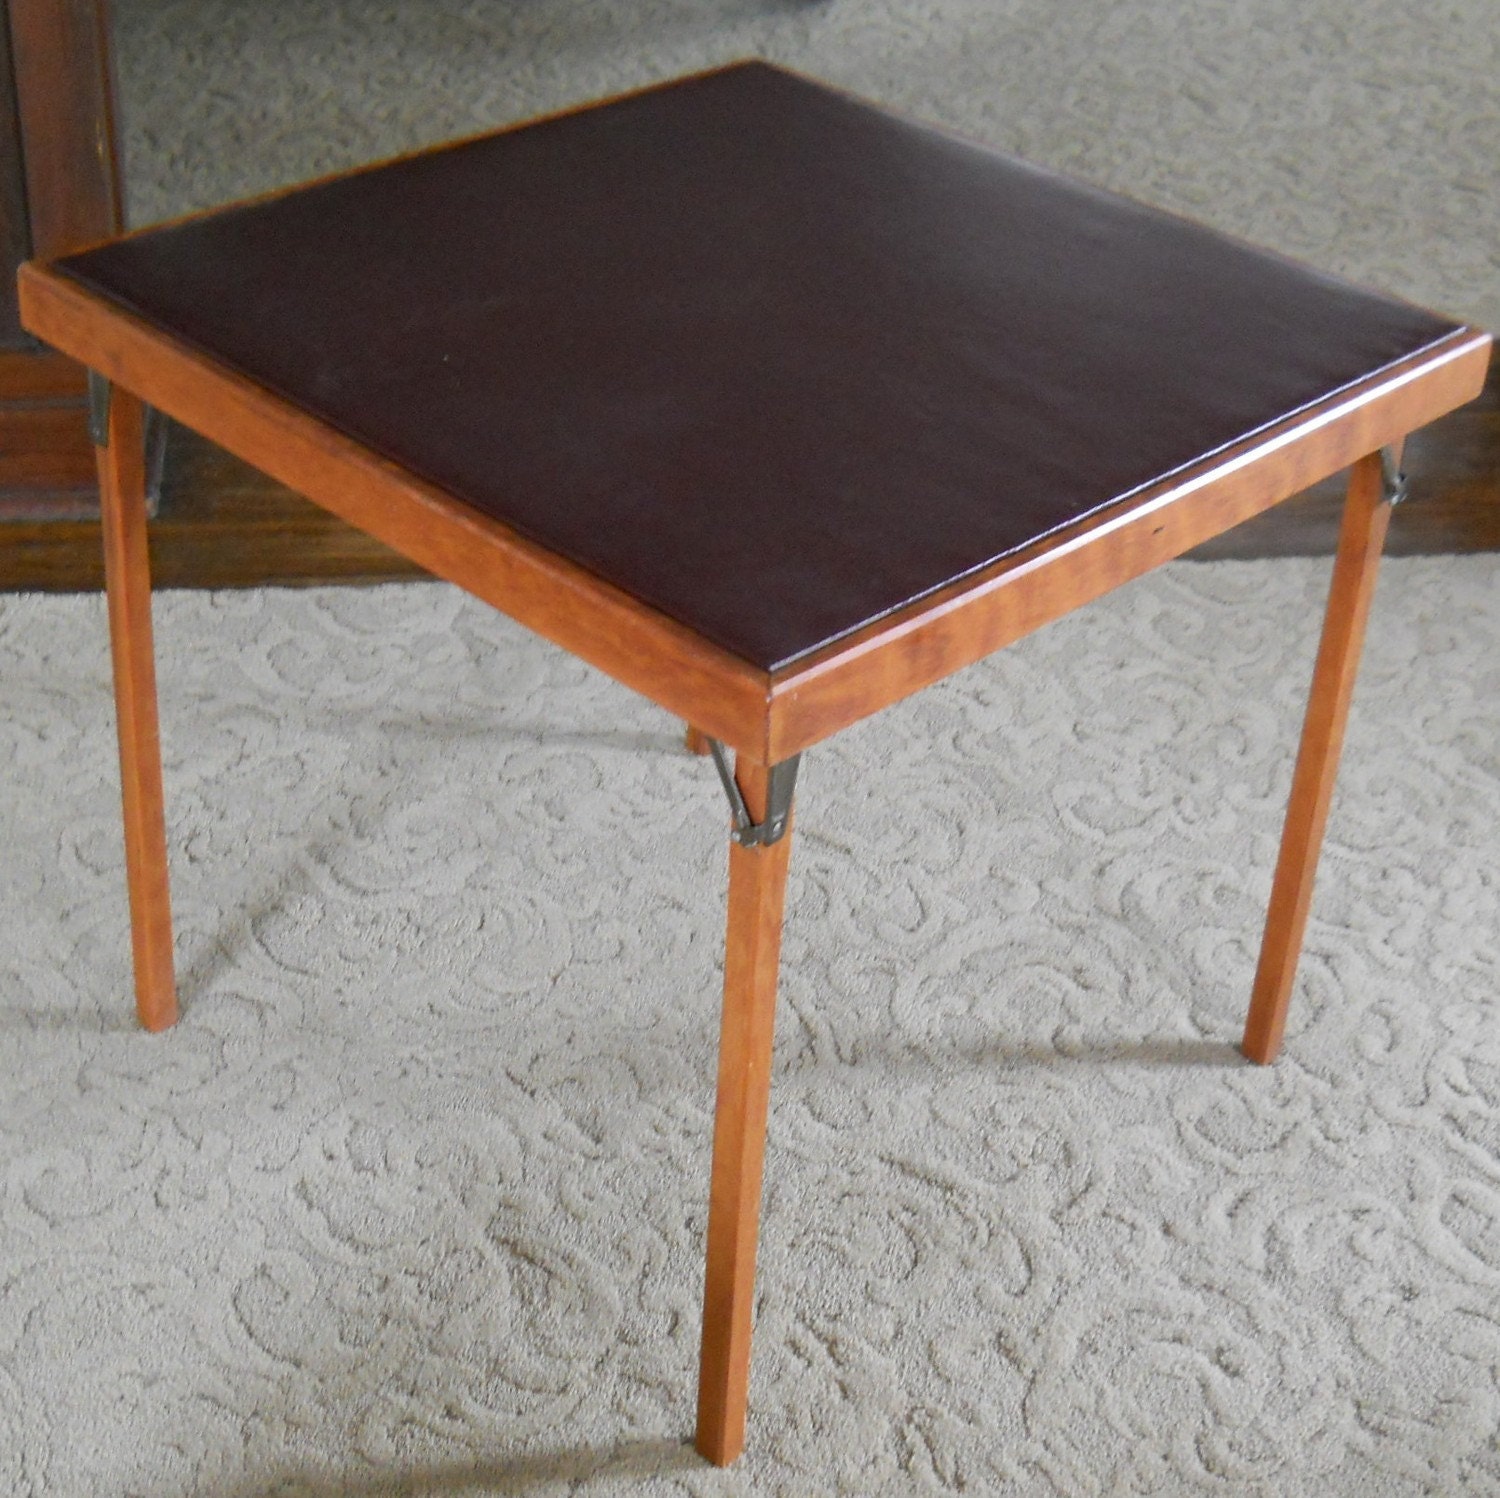 Vintage Wood Folding Card Table by lisabretrostyle2 on Etsy